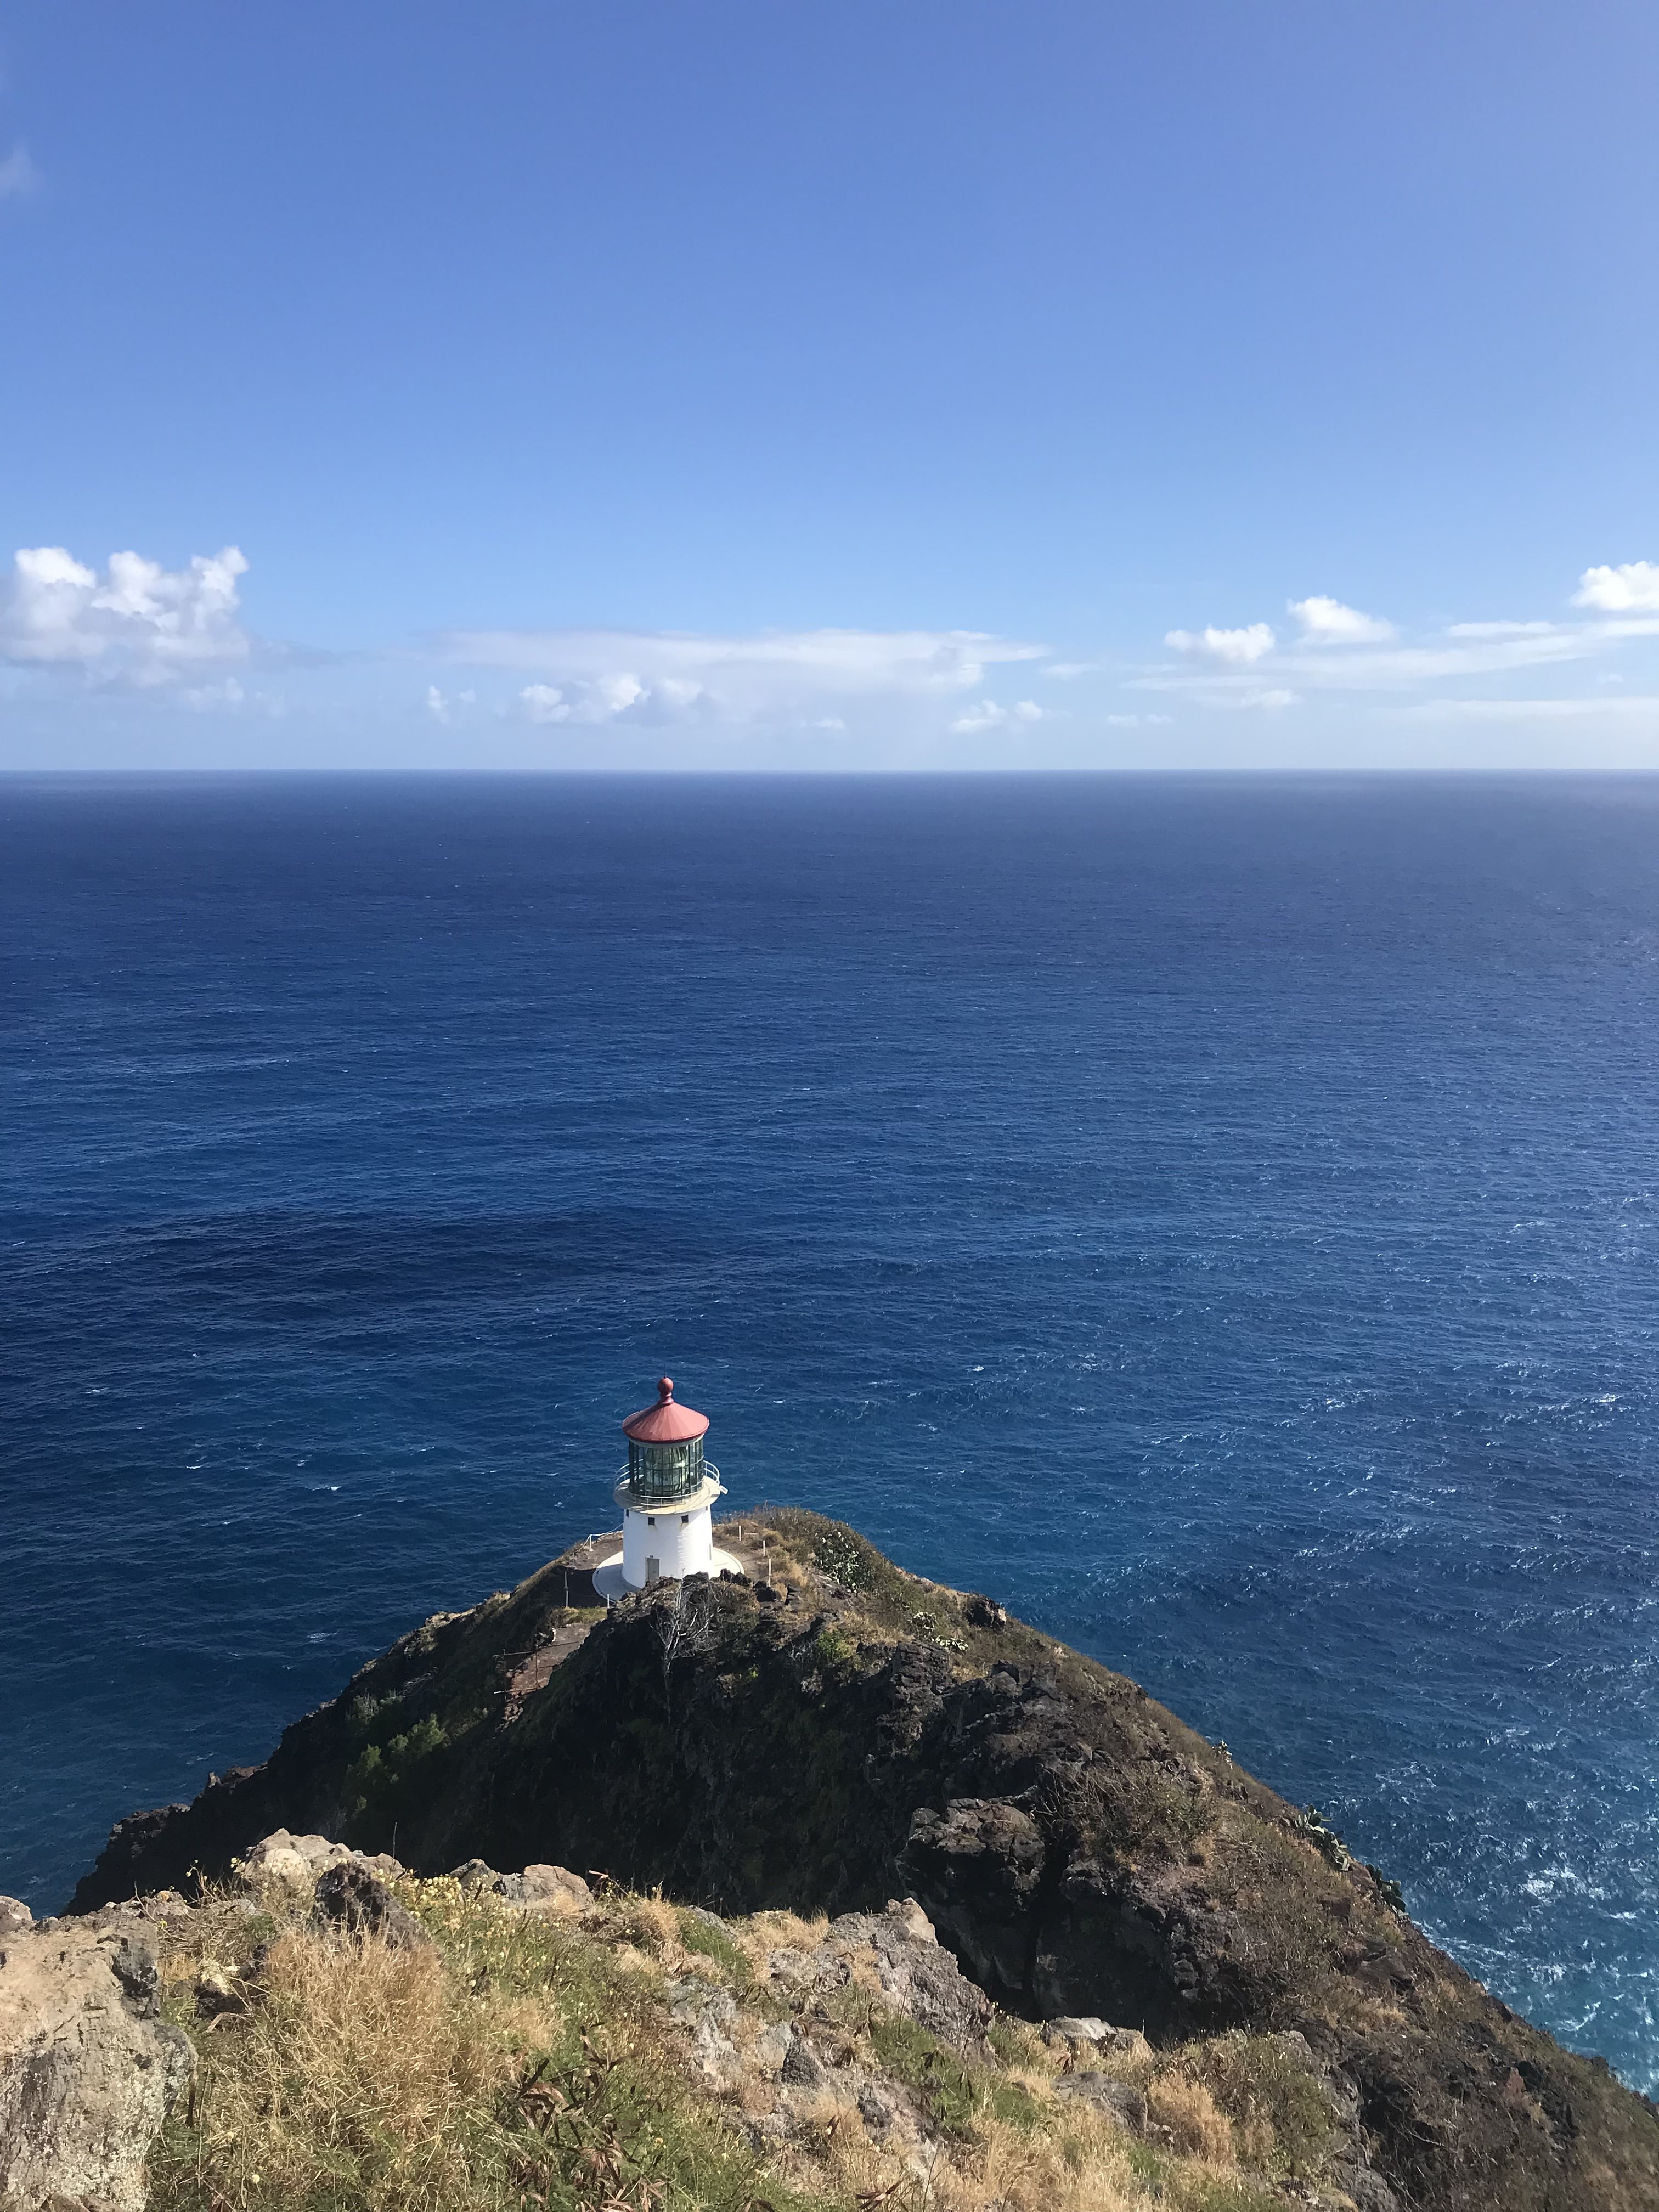 HIKING IN HAWAII: MAKAPUU LIGHTHOUSE TRAIL | An easy hike on Oahu that is fun for hikers of all ages along a paved path that offers beautiful views at the top! - Makapuu Lighthouse - Makapuu Lighthouse Trail - Makapuu Lighthouse Hike - Makapuu Point Lighthouse - Makapuu Lighthouse Trail Hours - Easy Hikes Oahu - Oahu Hikes - Oahu Hikes For Kids - Oahu Hikes For Families - Easy Oahu Hikes - Short Oahu Hikes - #oahu #travel #hawaii